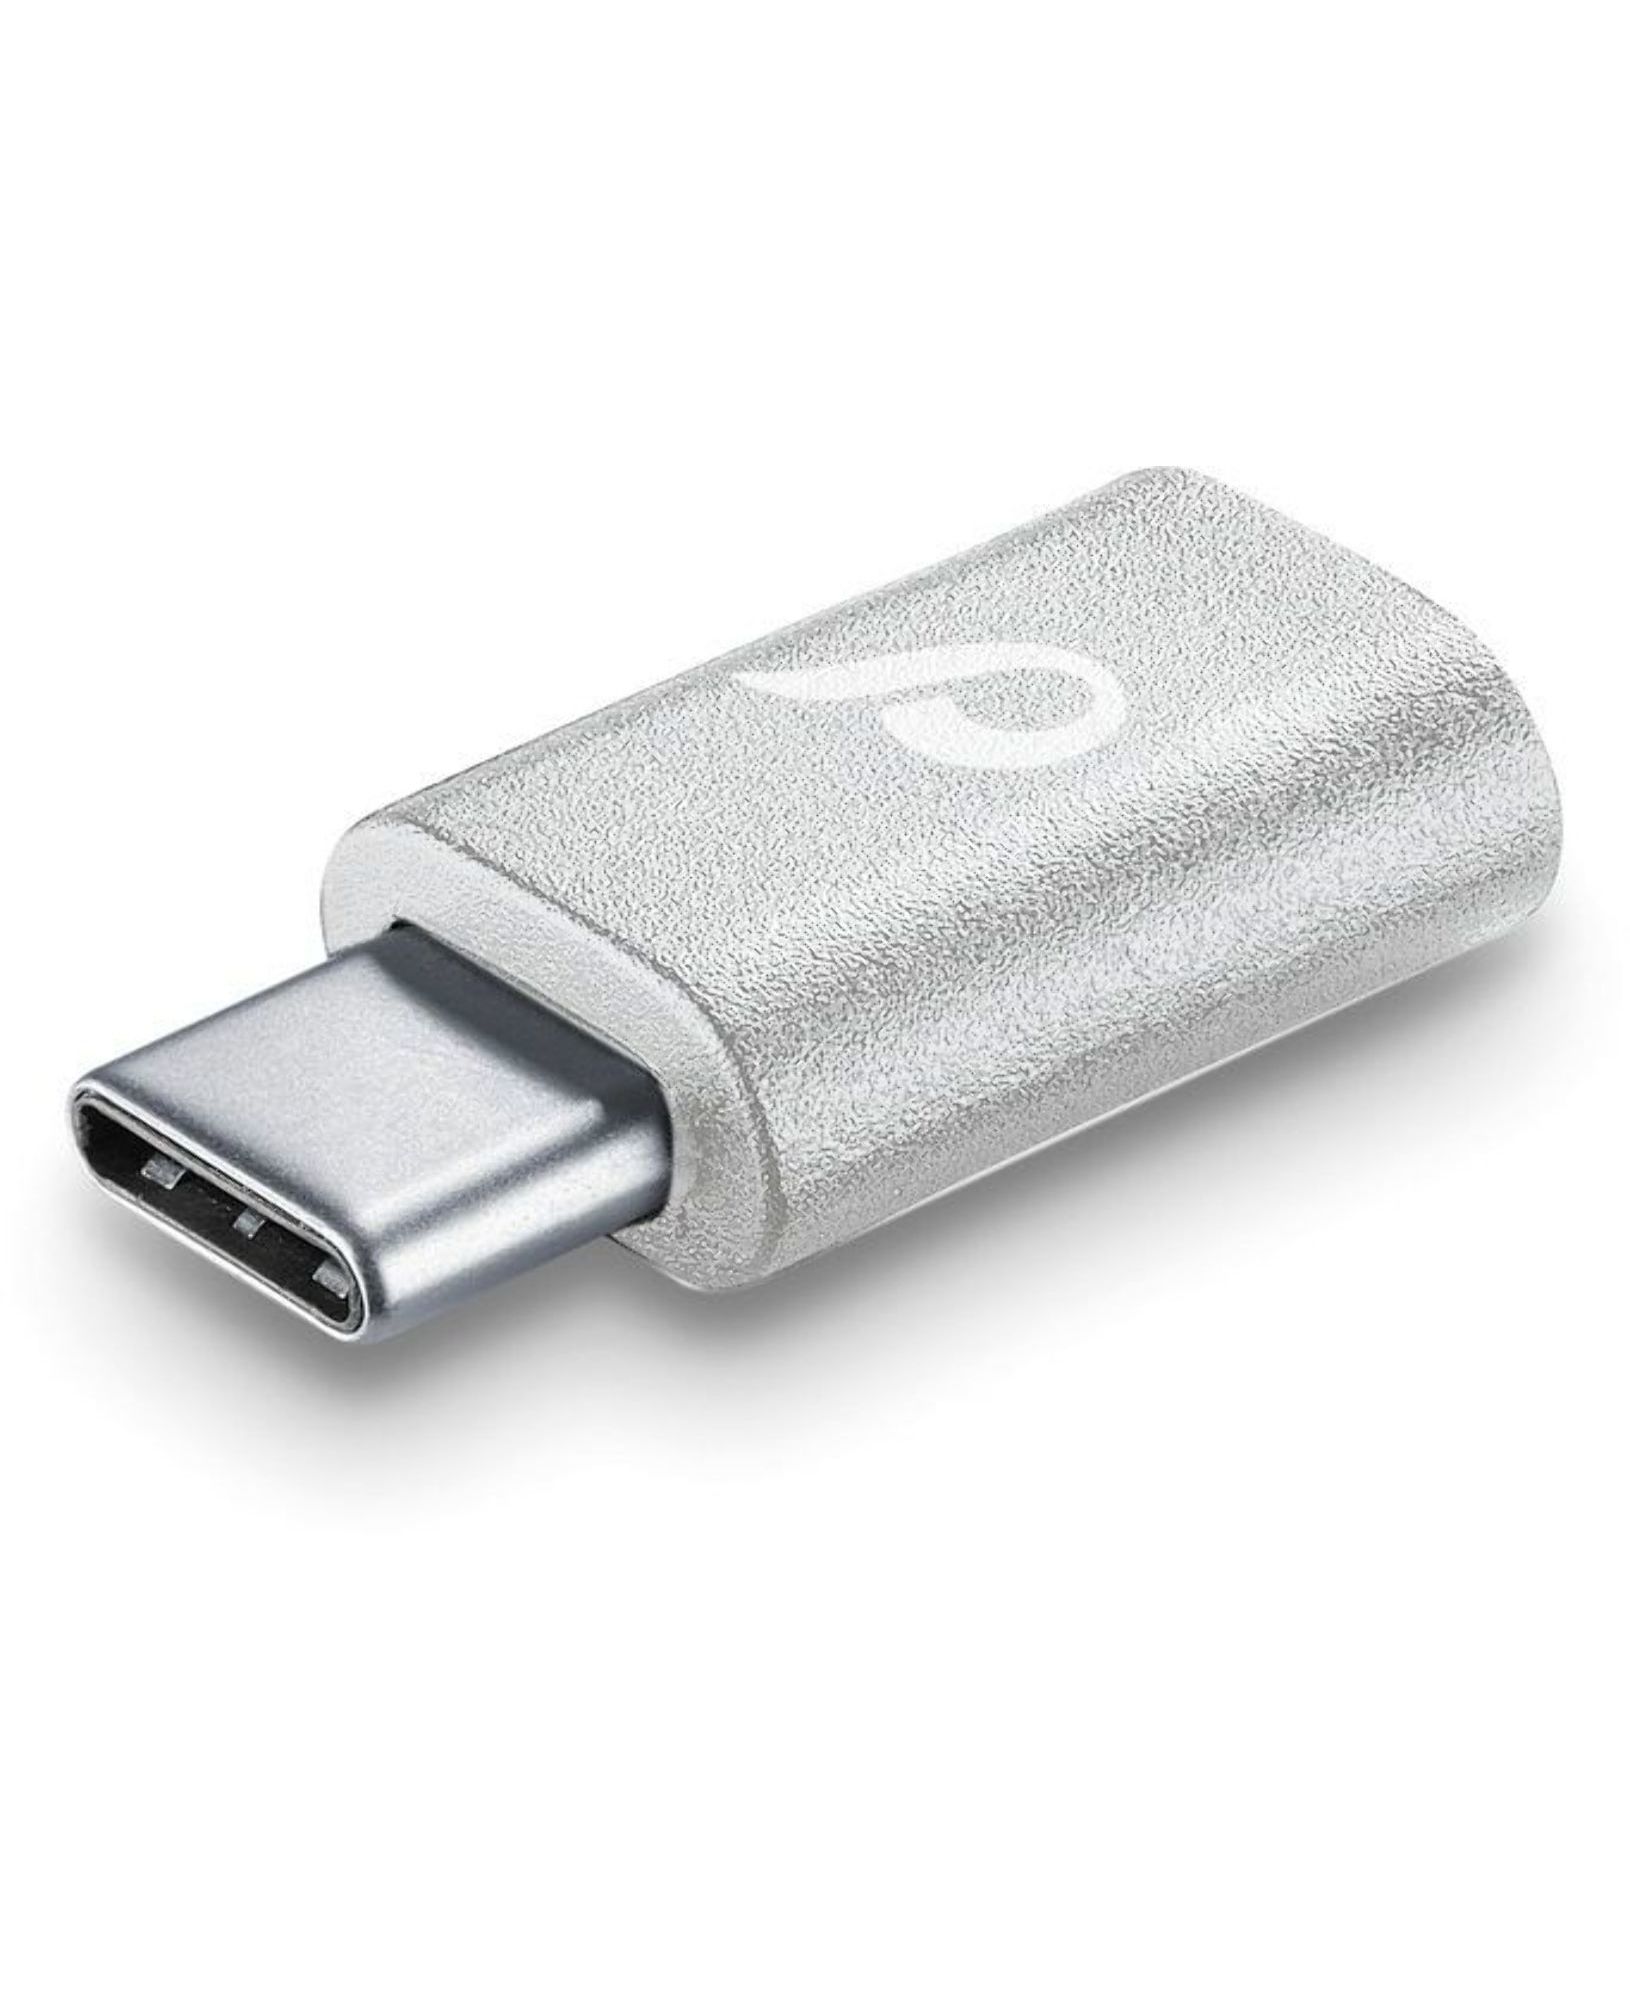 Adapter micro-usb to usb-c, white